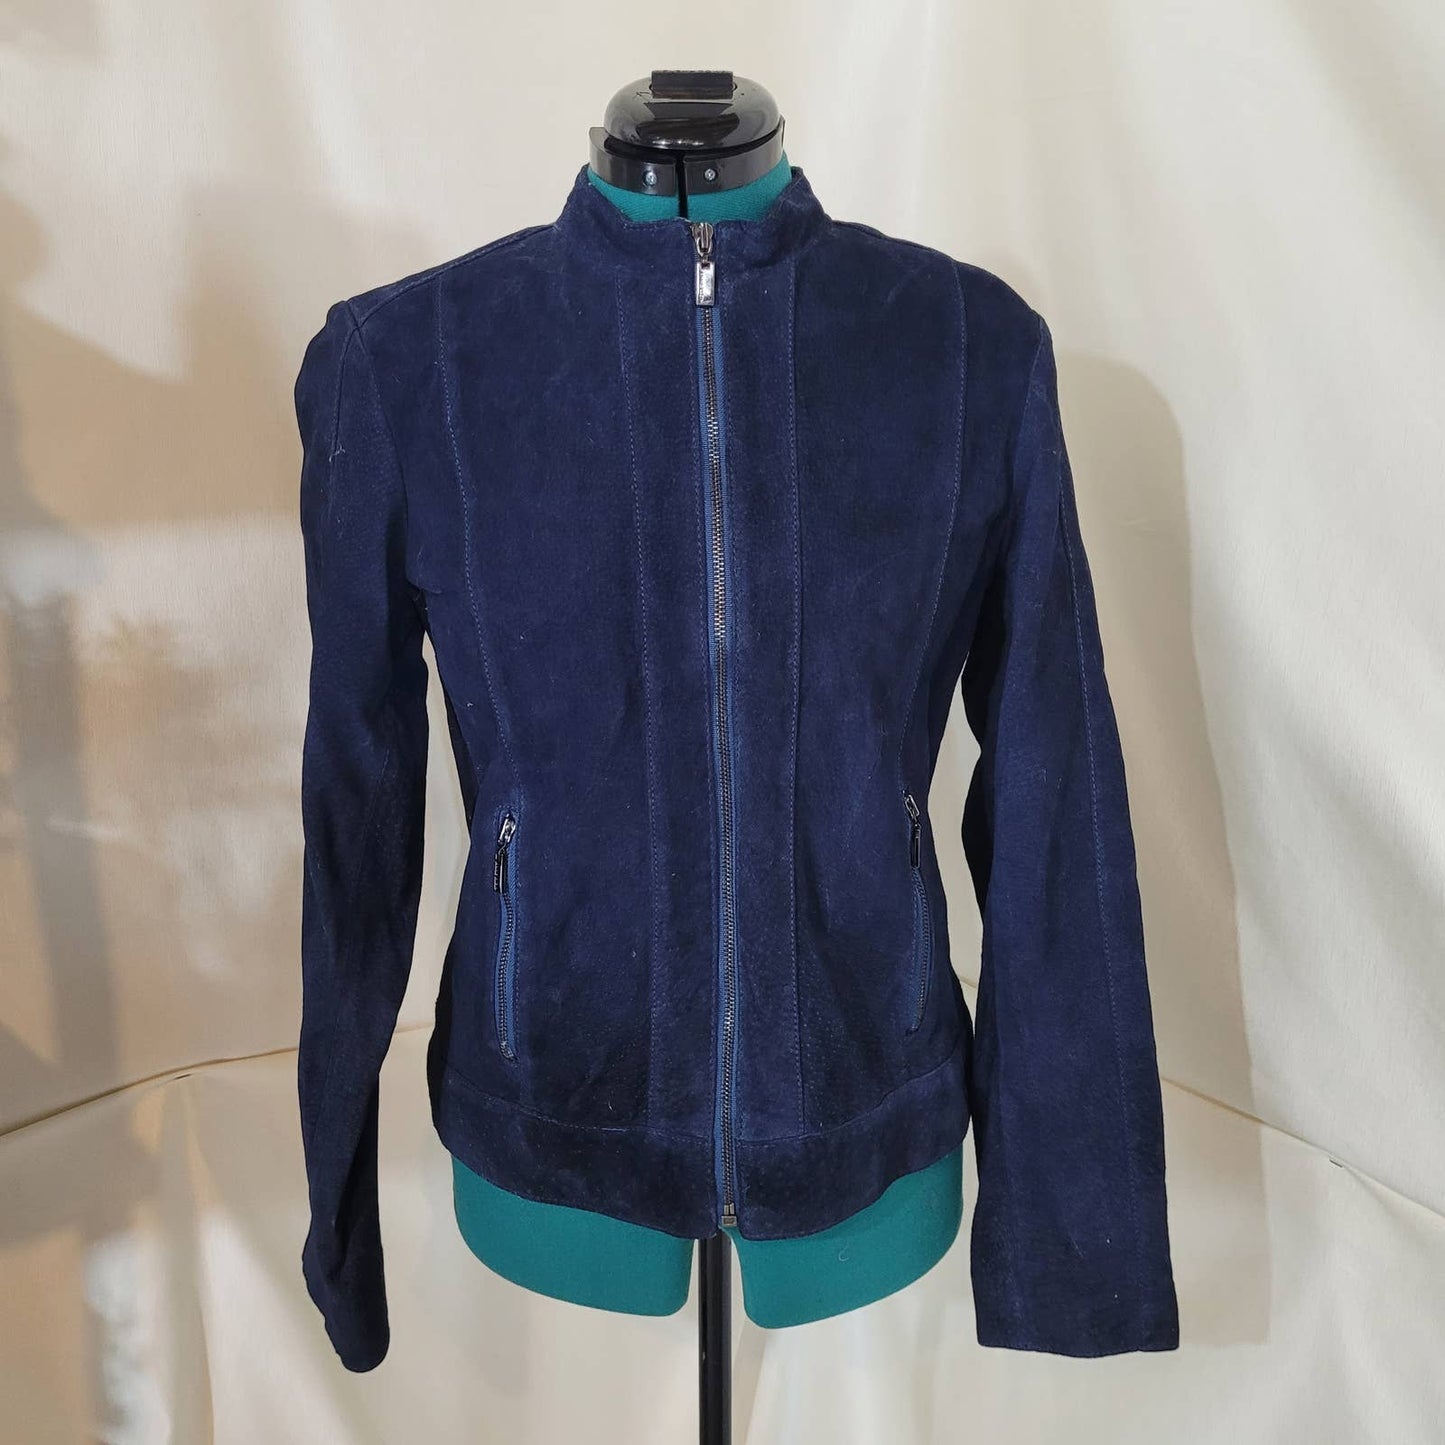 Anne Klein Blue Suede Leather Jacket - Size Small